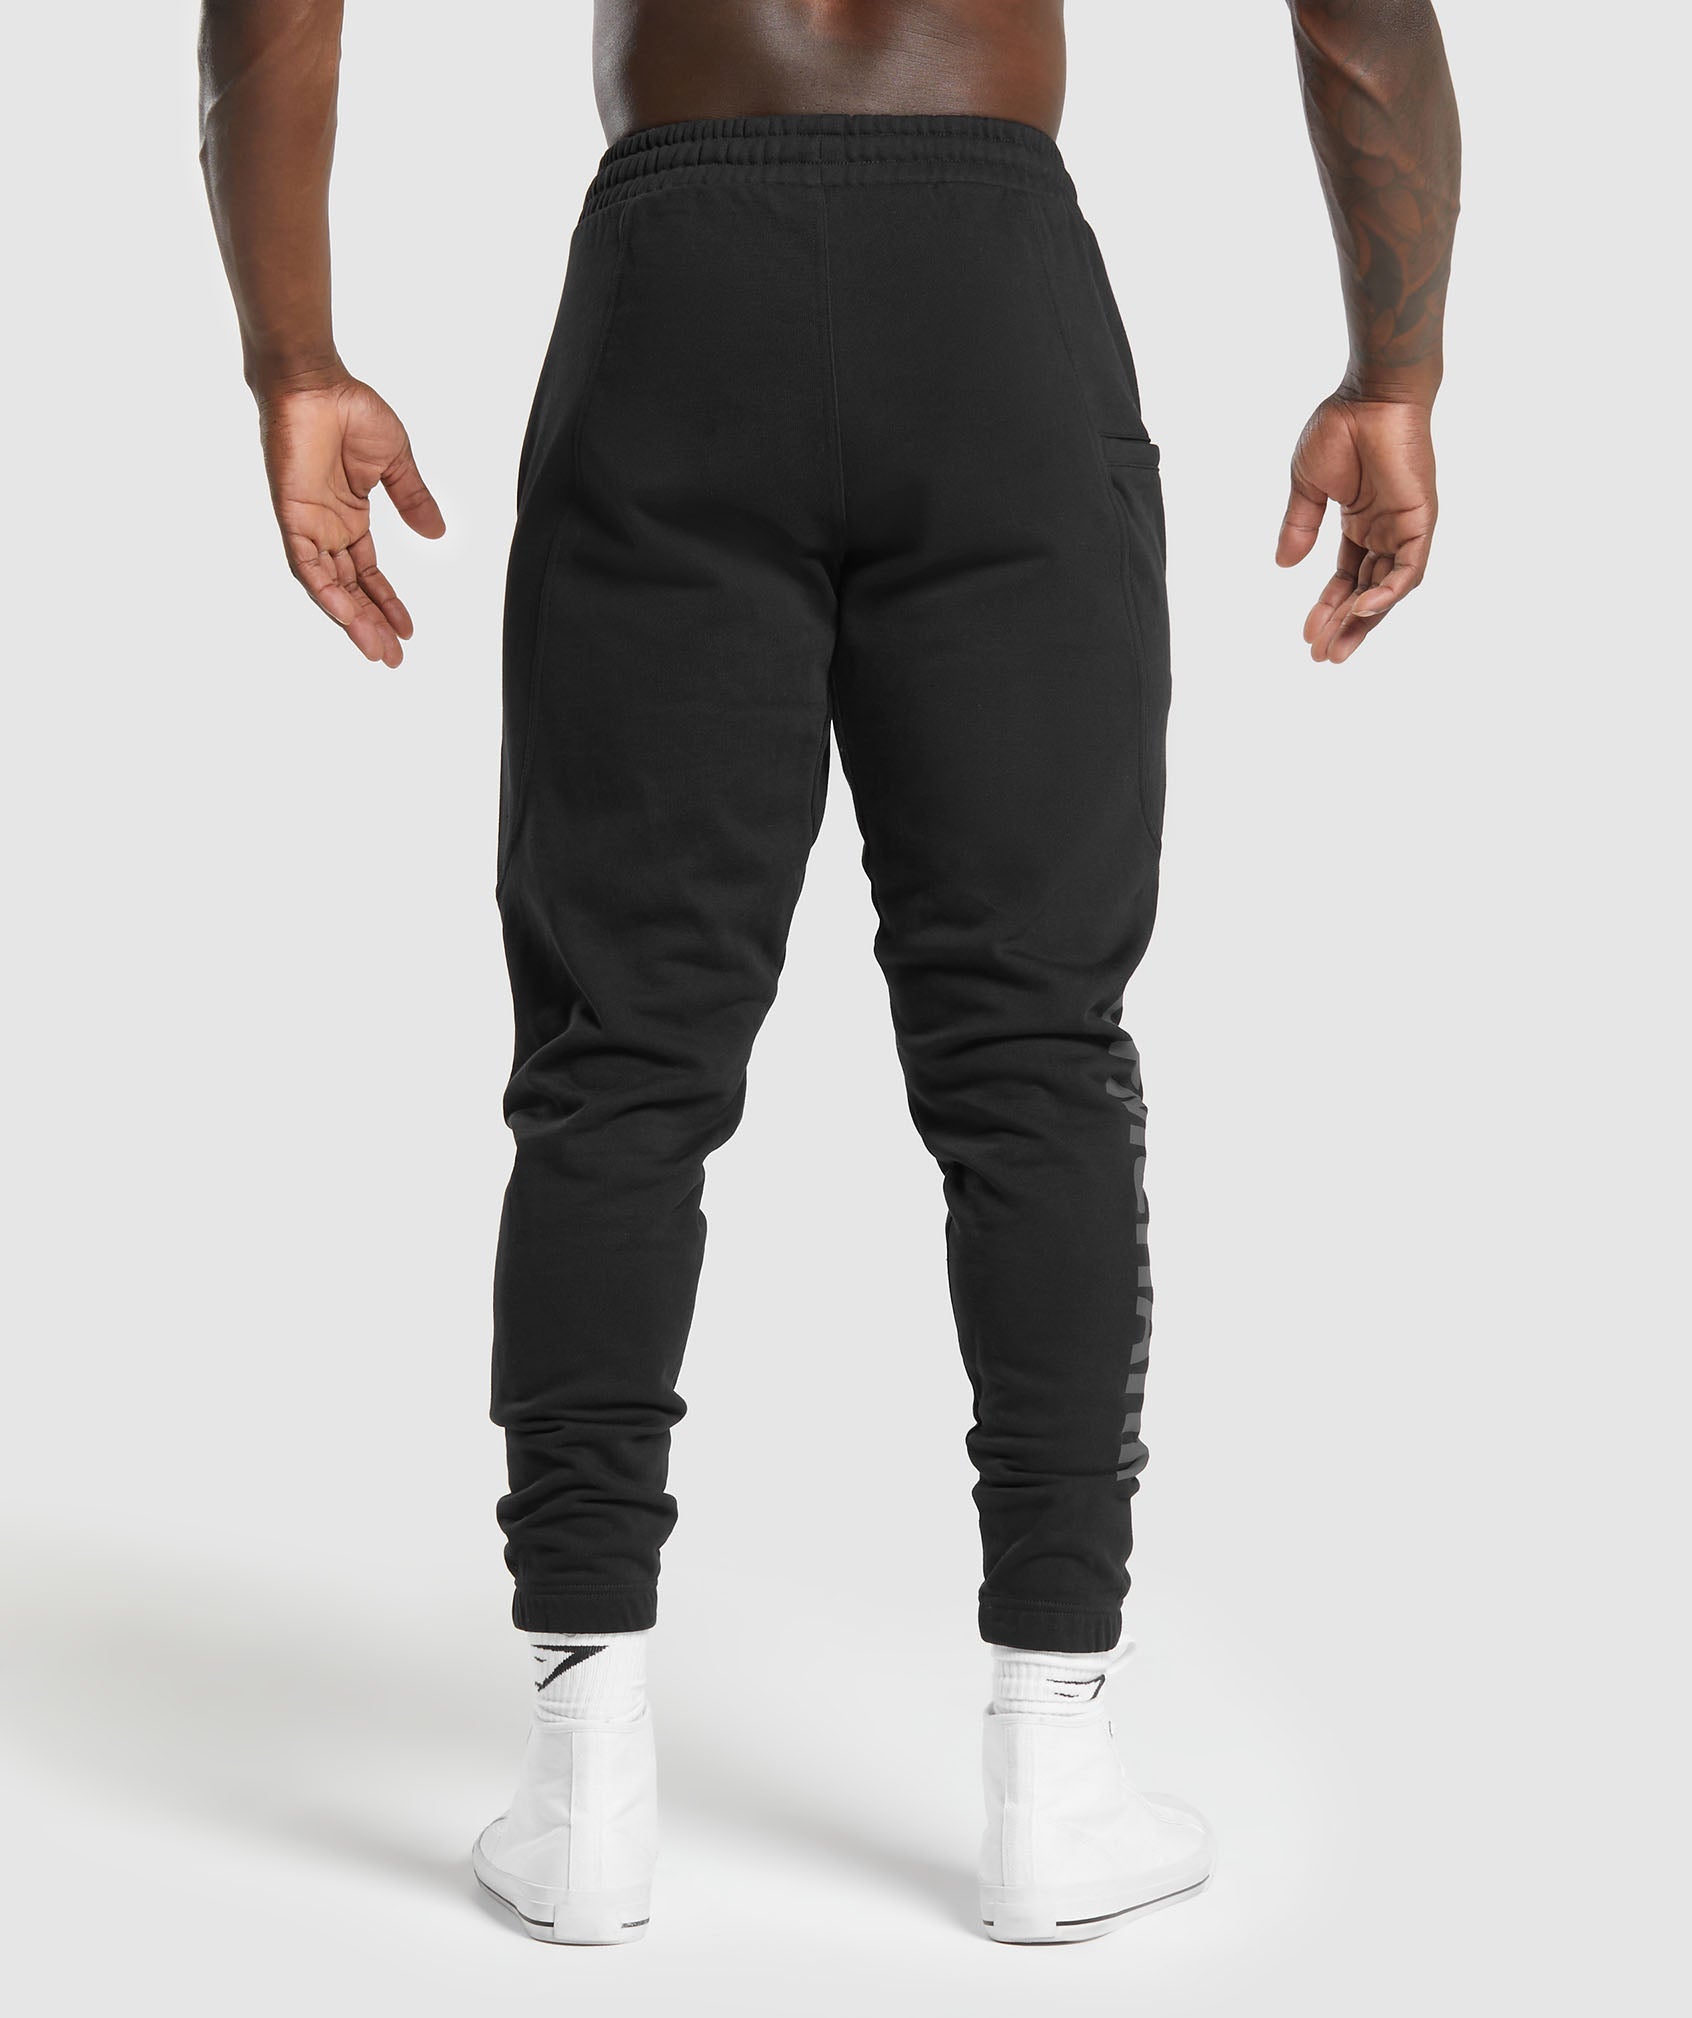 Power Joggers in Black - view 3